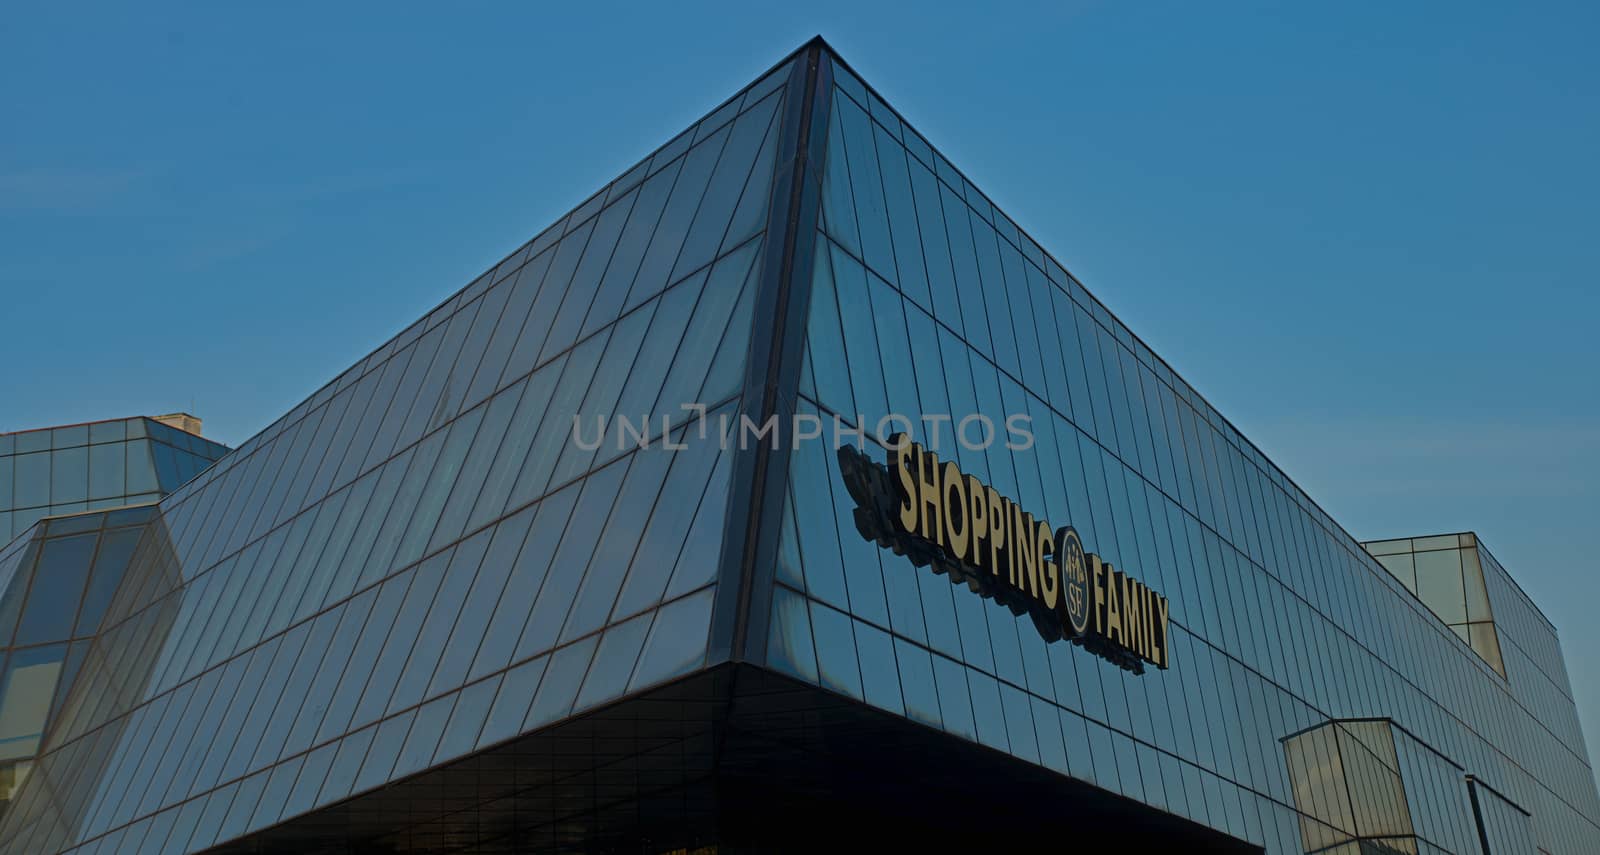 Modern glass building with sign with sign shopping family